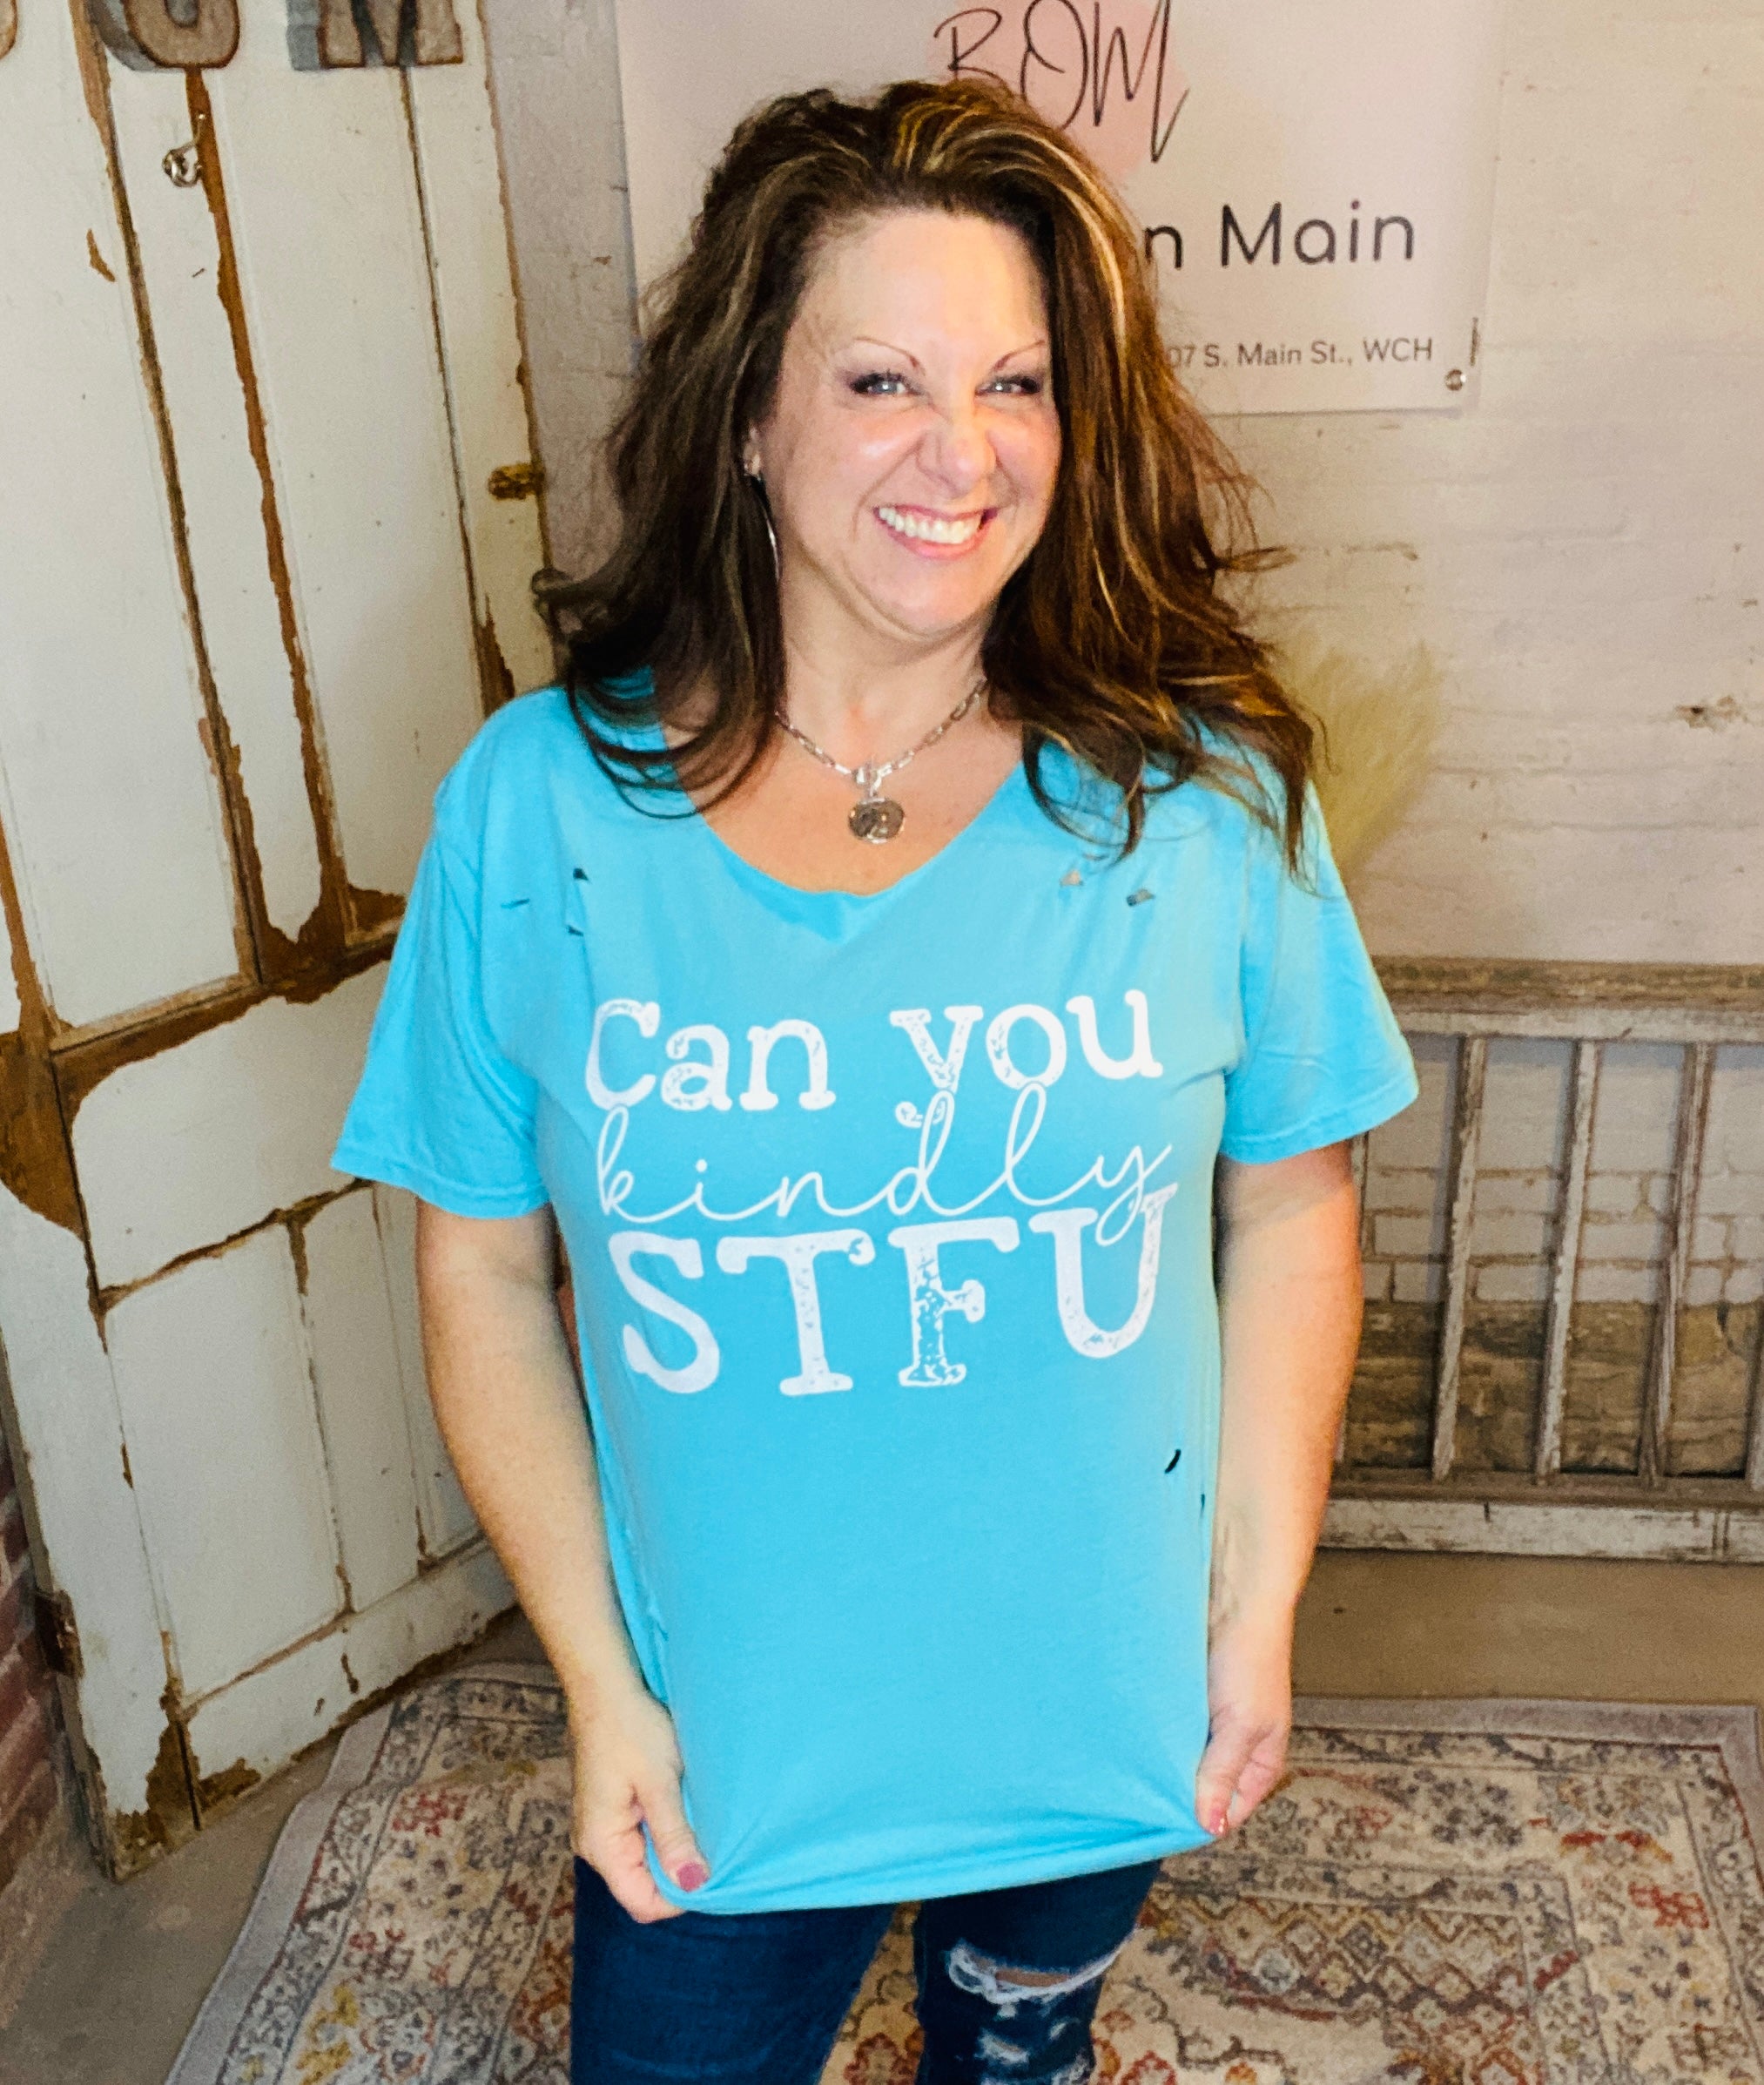 Chase Design Co.-Kindly STFU Tee-BOM-Boutique on Main -everything, graphic tee, tops